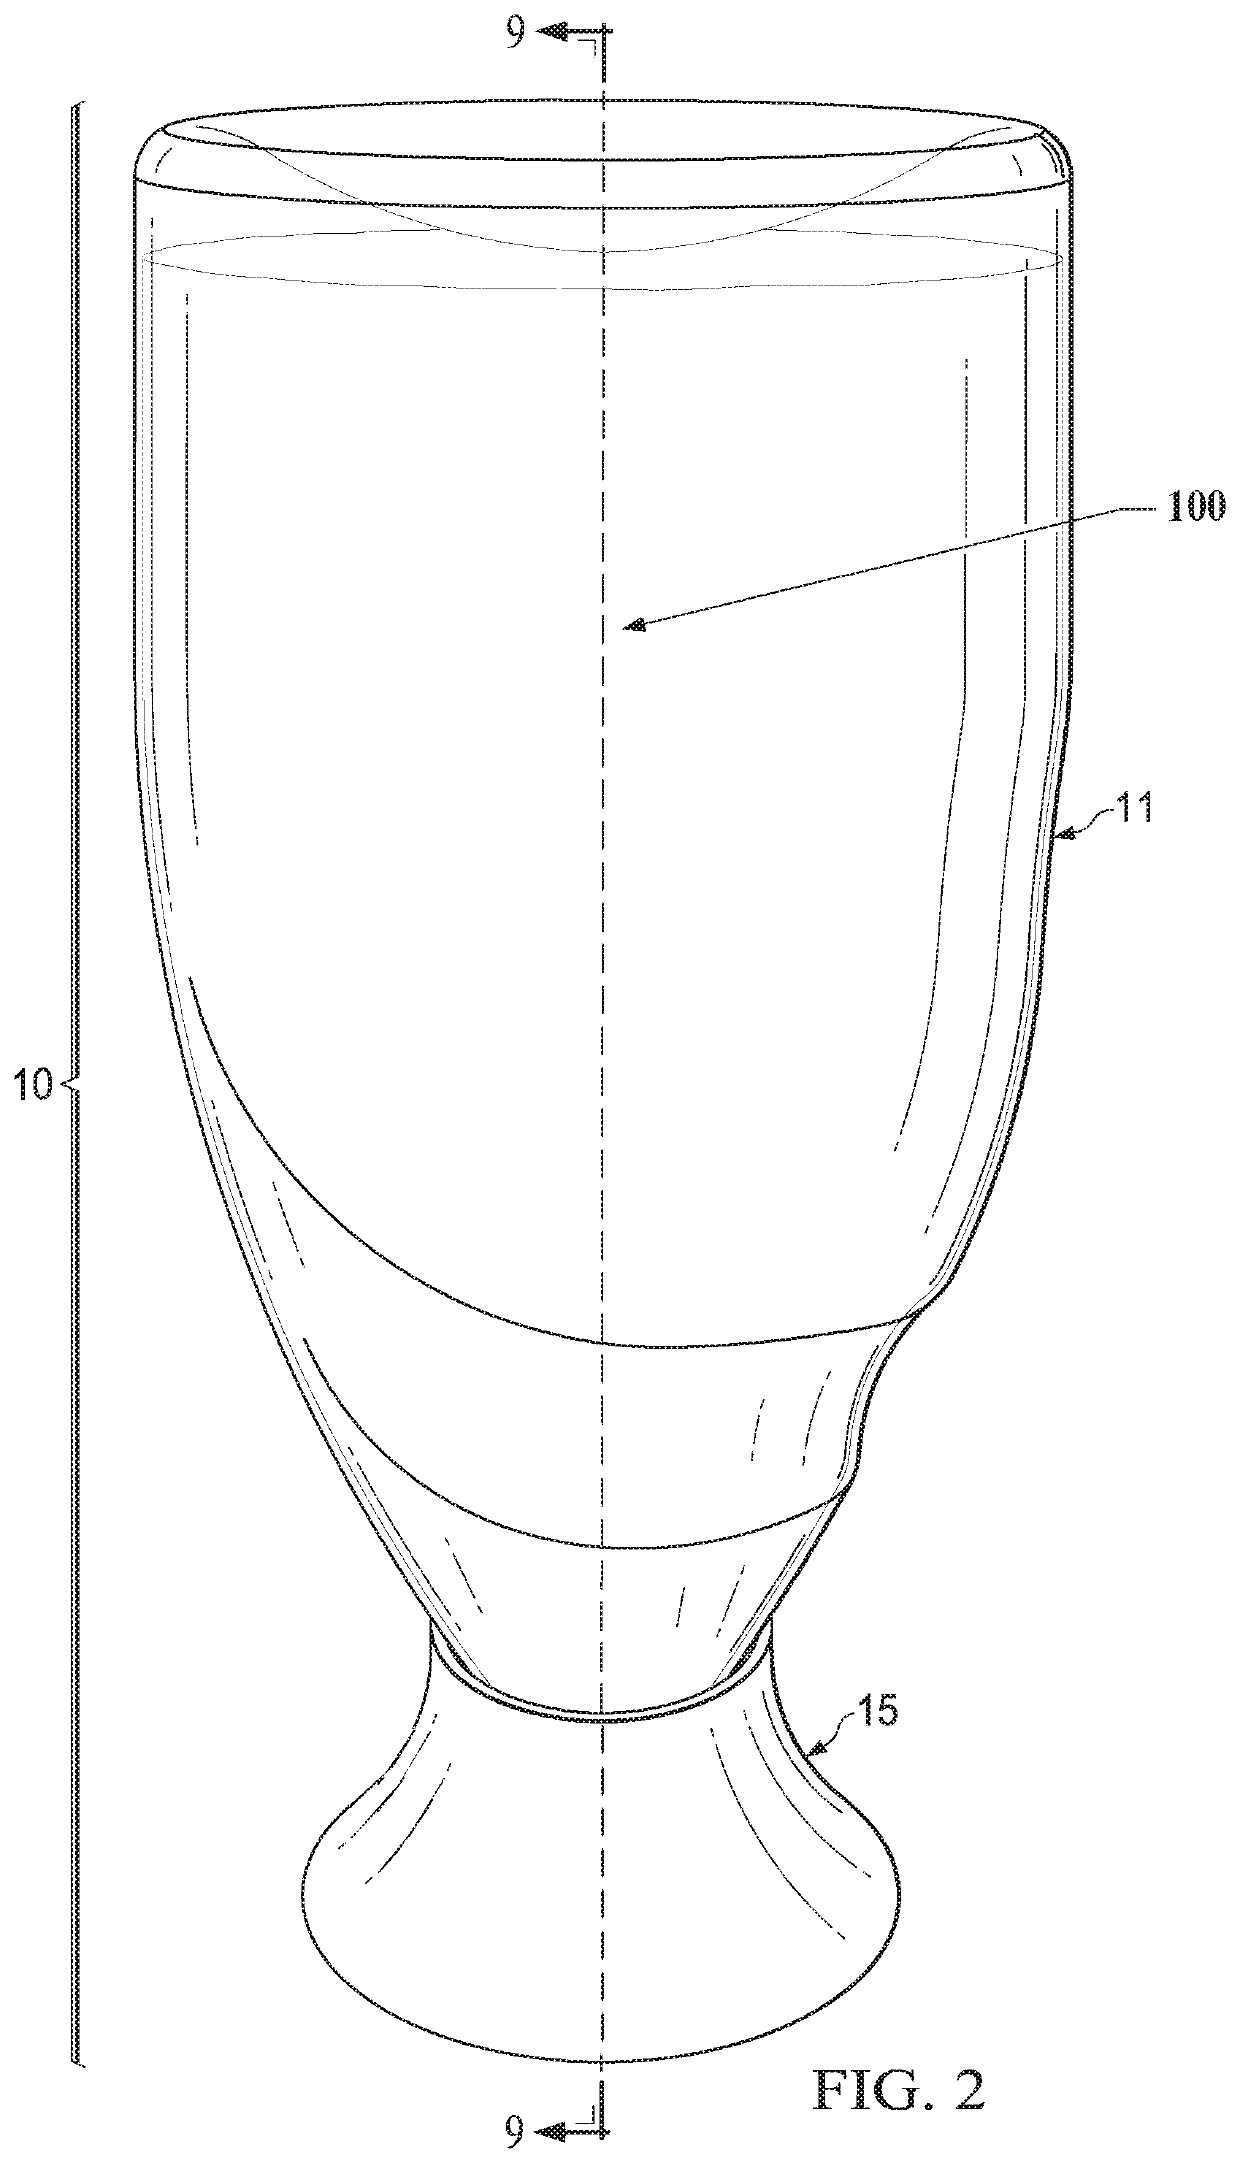 Cleaning product comprising an inverted container assembly and a viscous cleaning composition